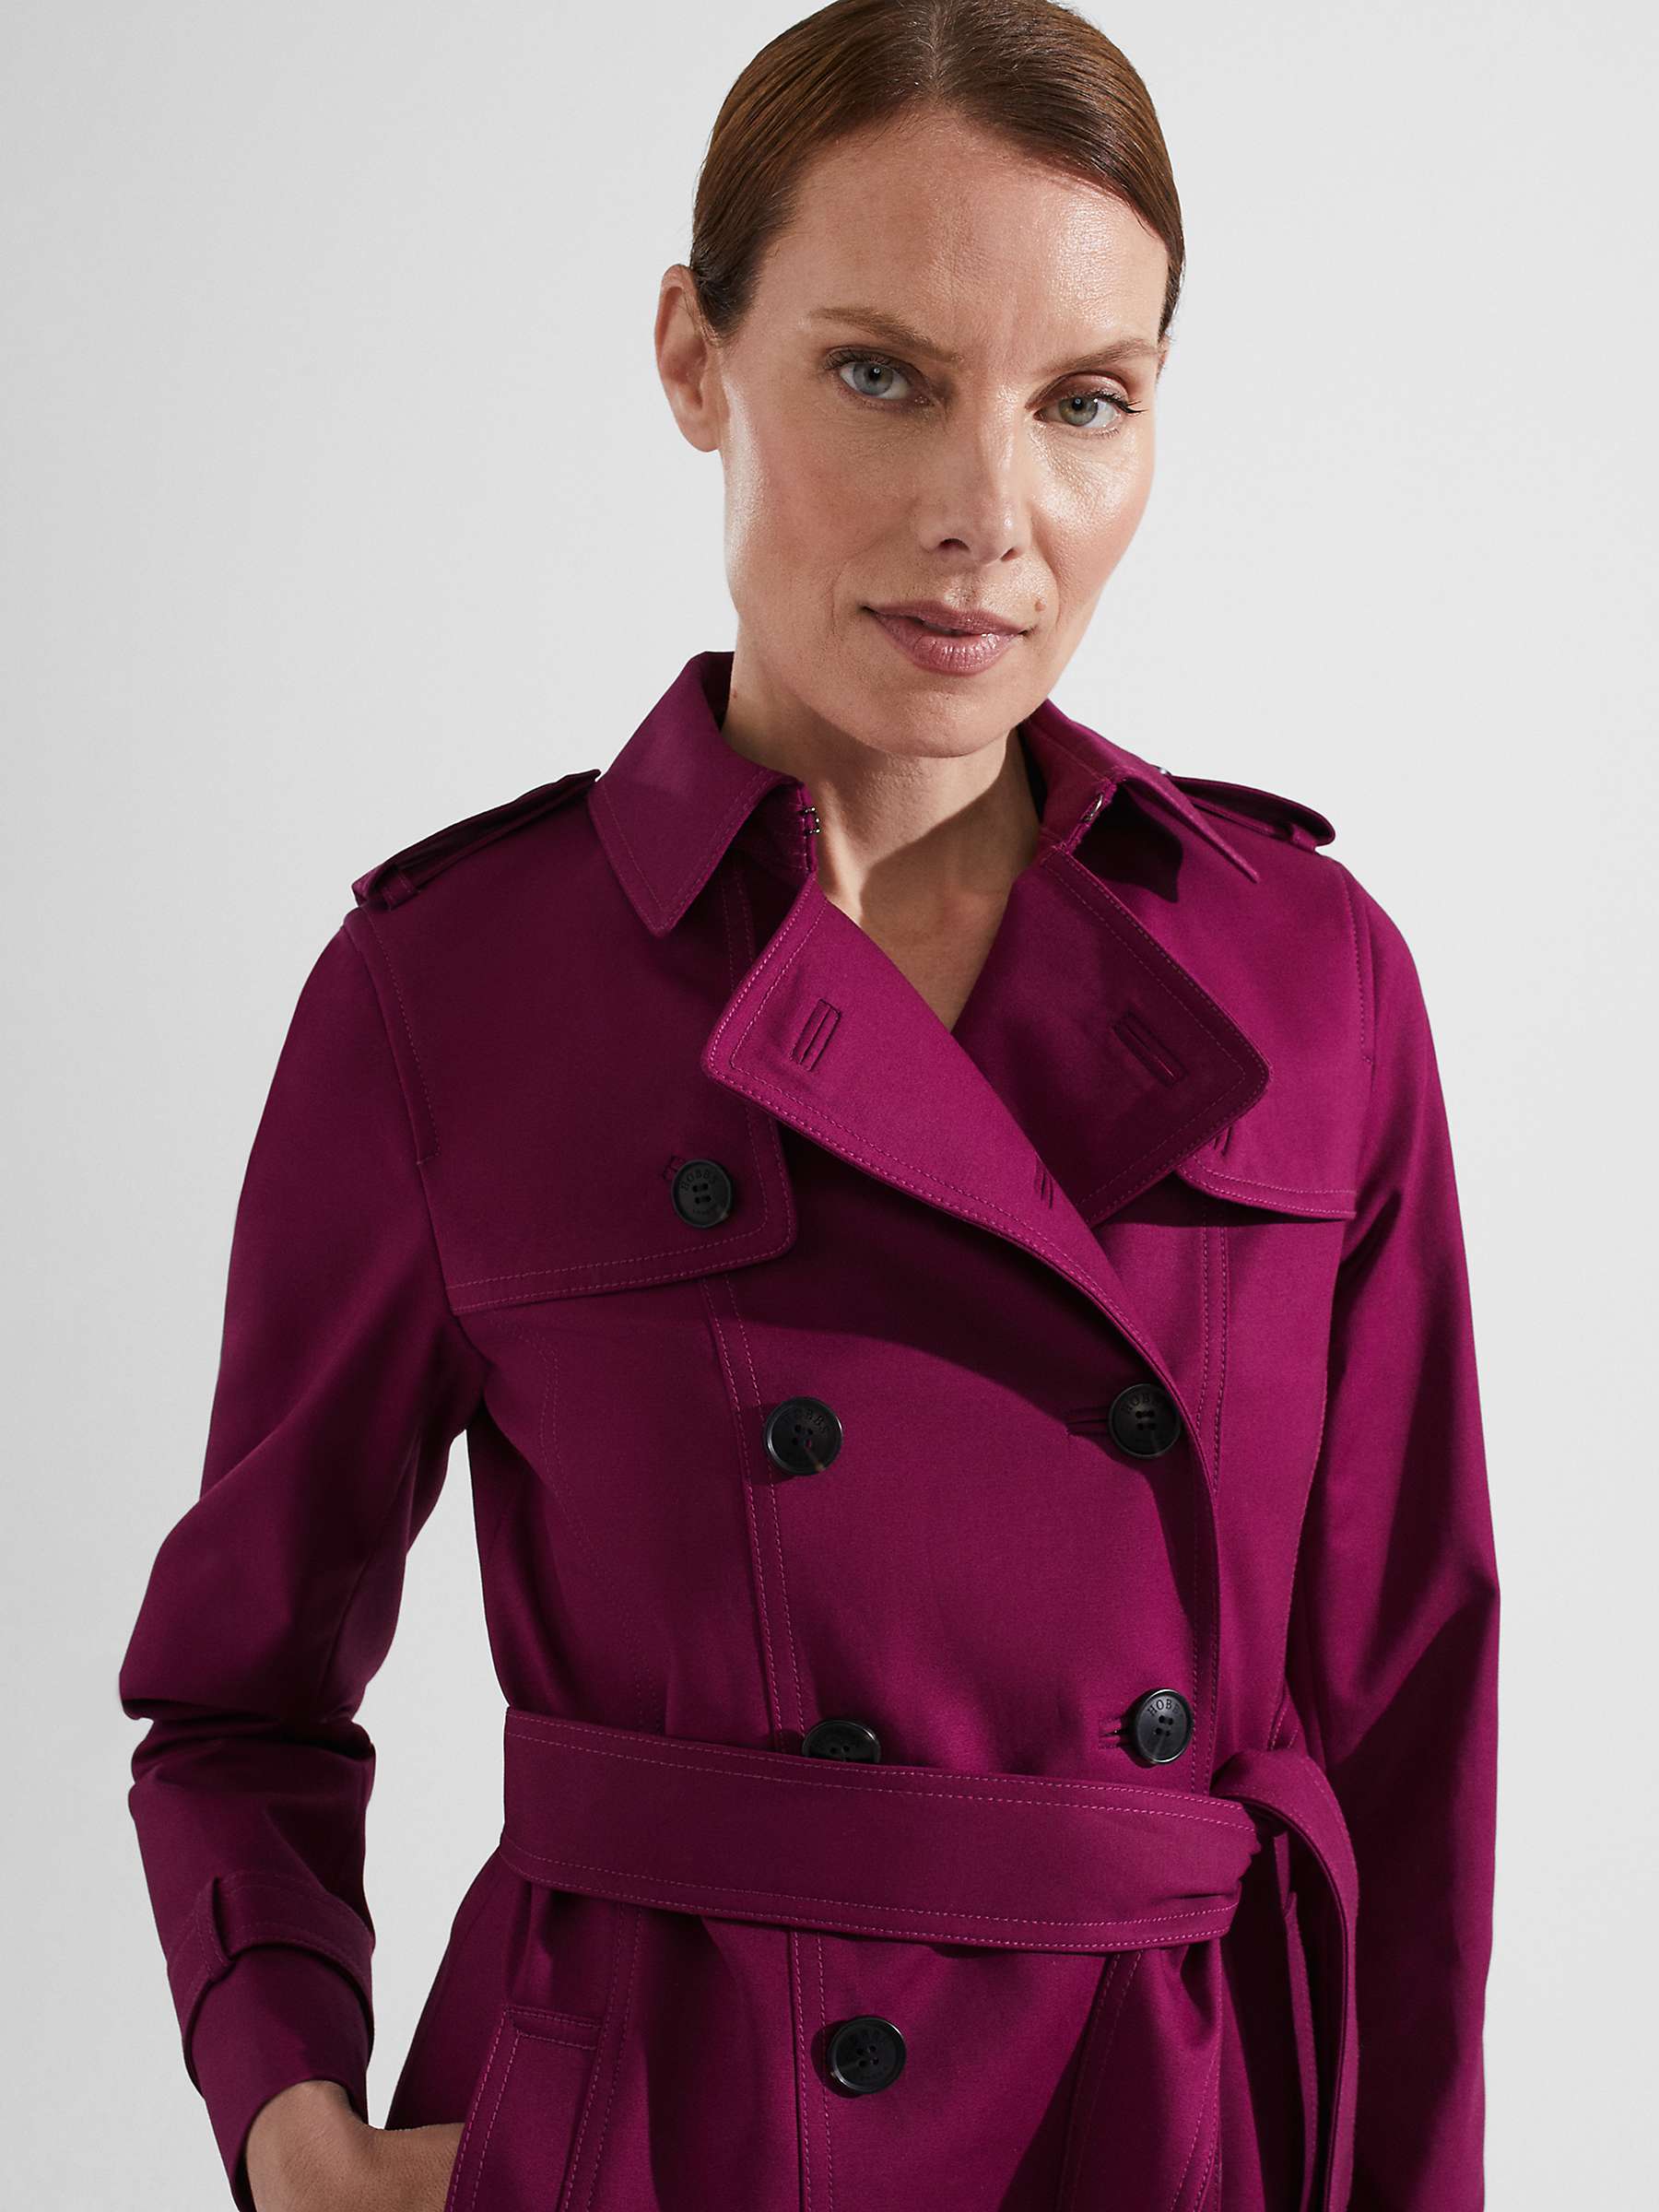 Buy Hobbs Saskia Double Breasted Trench Coat Online at johnlewis.com